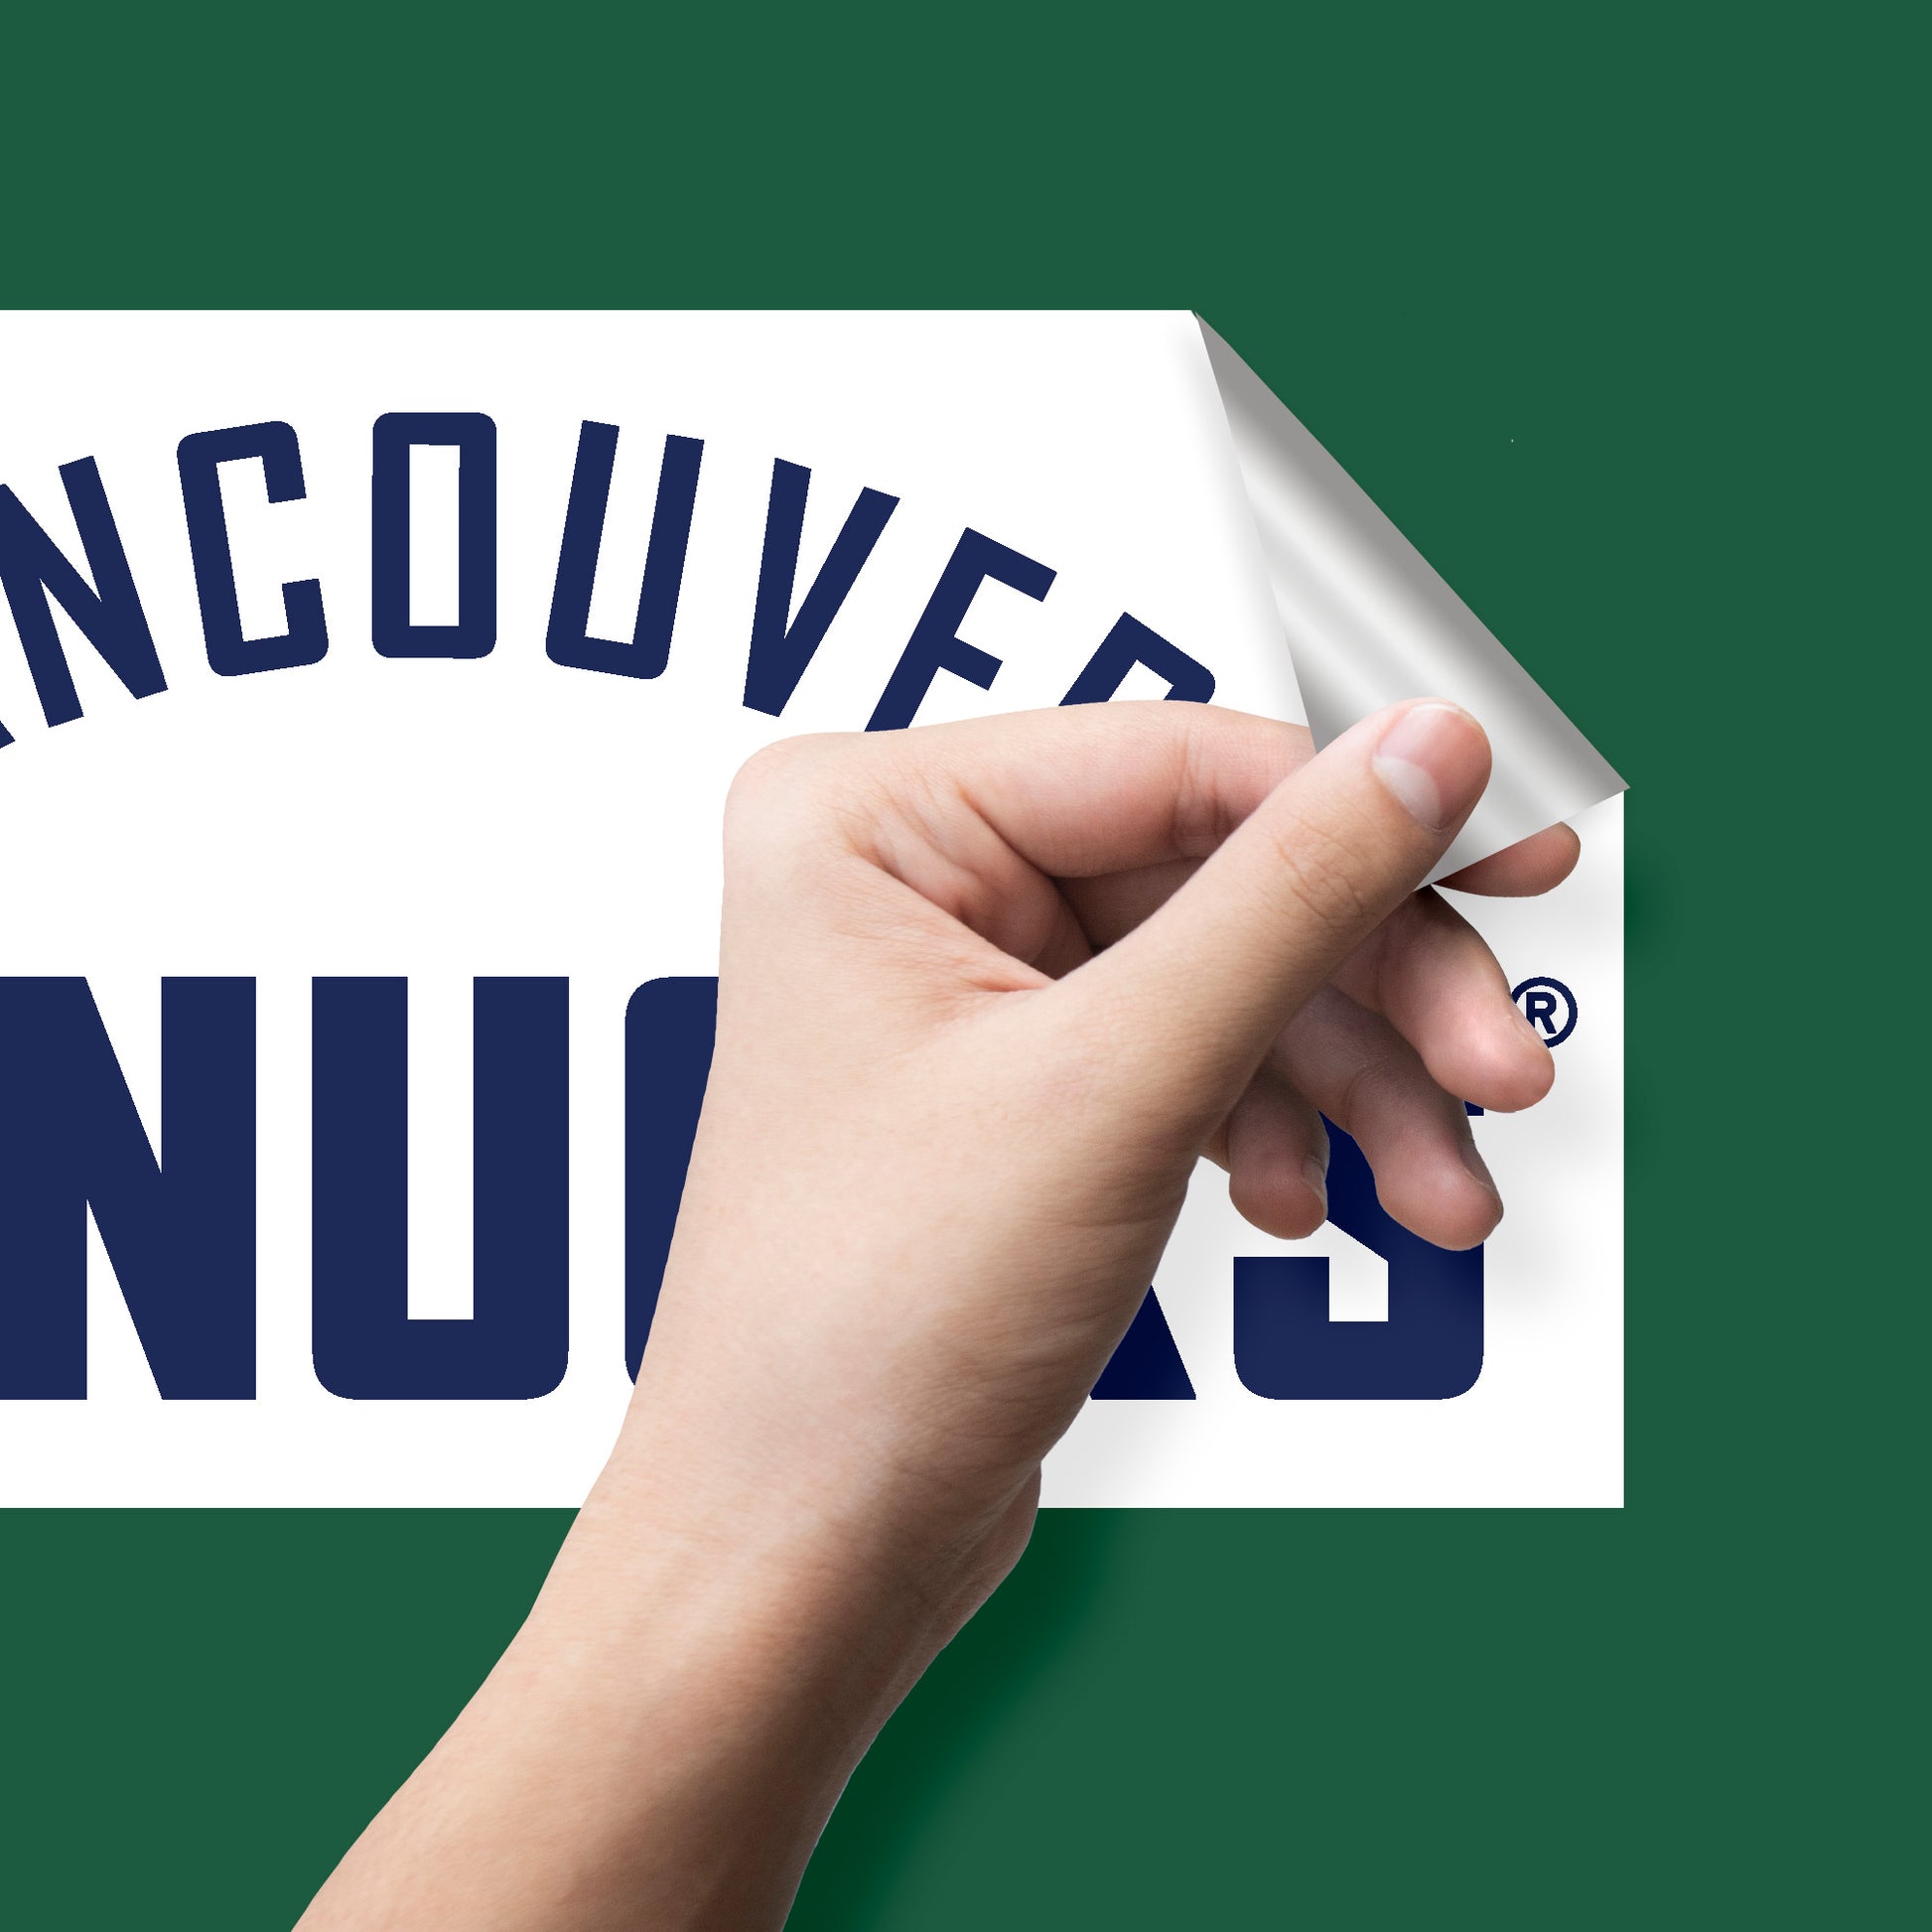 Vancouver Canucks: Elias Pettersson 2023 - Officially Licensed NHL  Removable Adhesive Decal